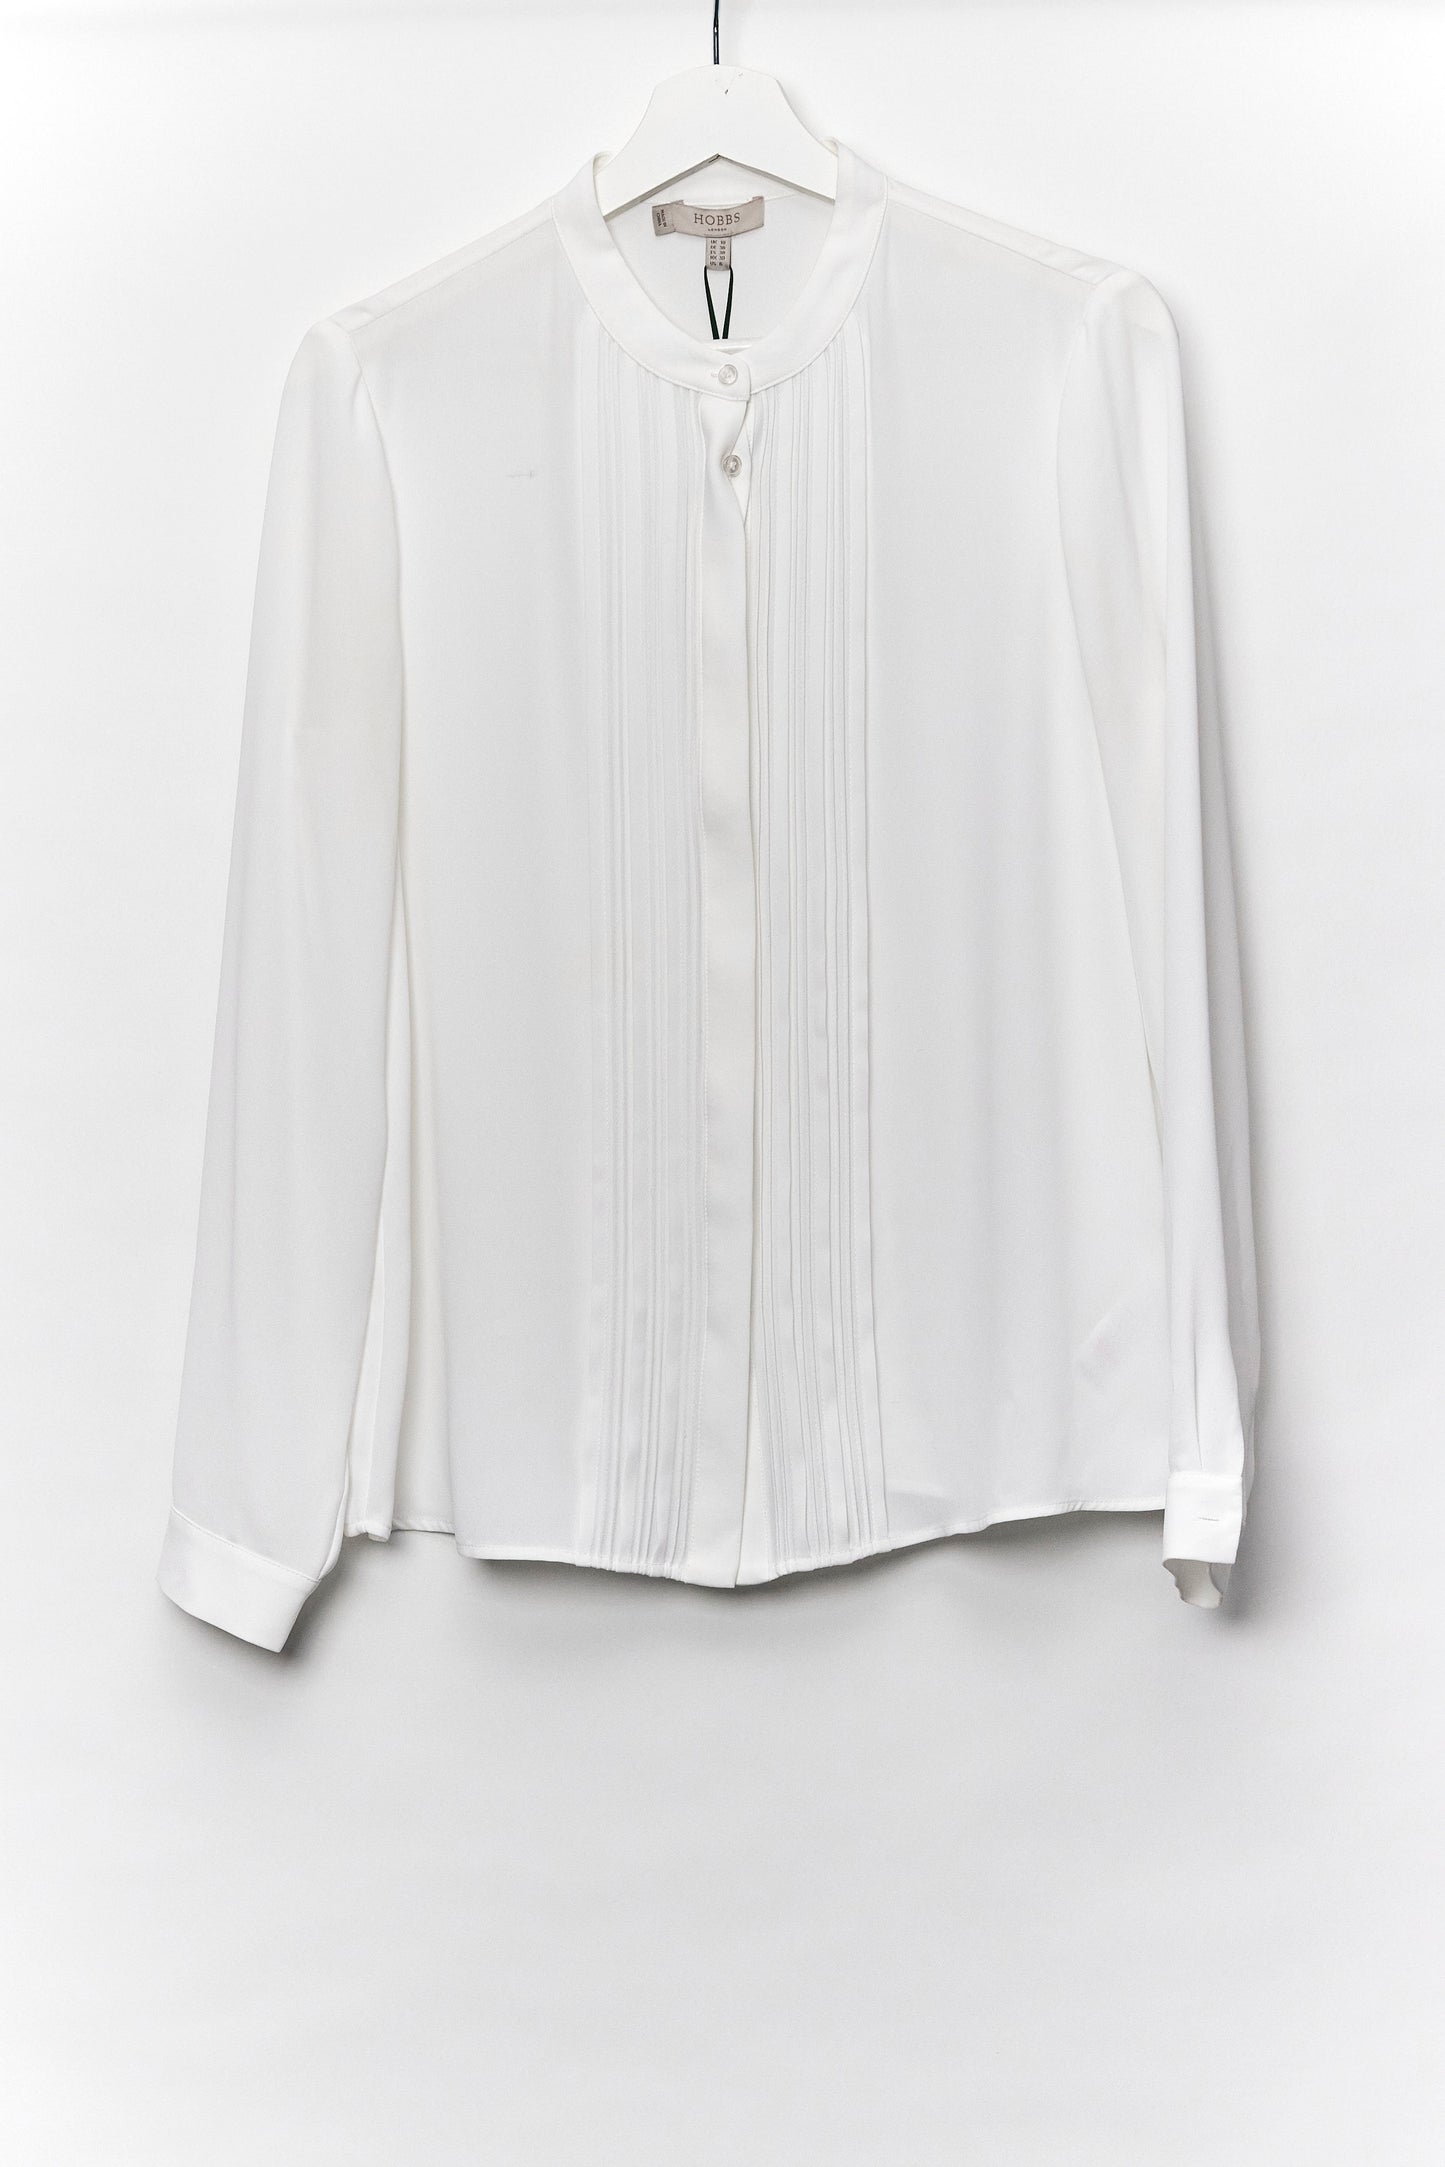 Womens Hobbs White Collarless blouse Size Small